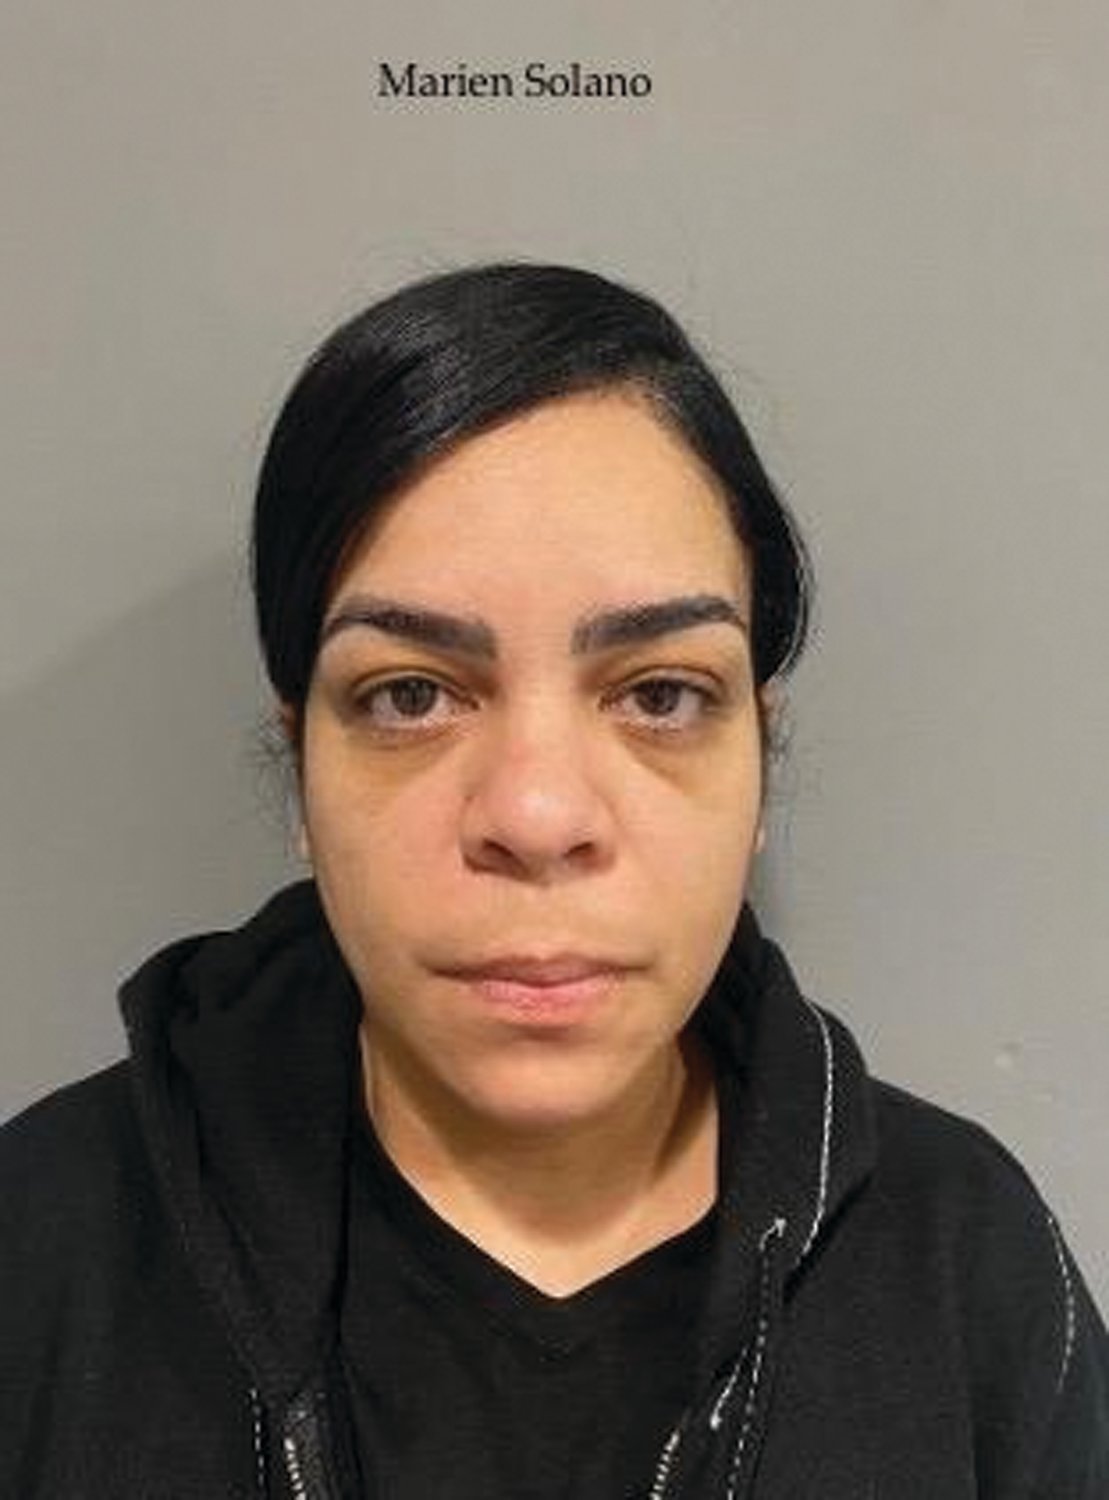 ARRESTED: The RISP HIDTA Task Force took three suspects into custody and charged them with drug crimes and failing to report a death: Noel Ignacio Moronta,  41, of 113 Sisson St., Providence; Nelson A. Reyes, 38, of 716 Central Ave., Johnston; and Marien Solano, 36, of 113 Sisson St., Providence.